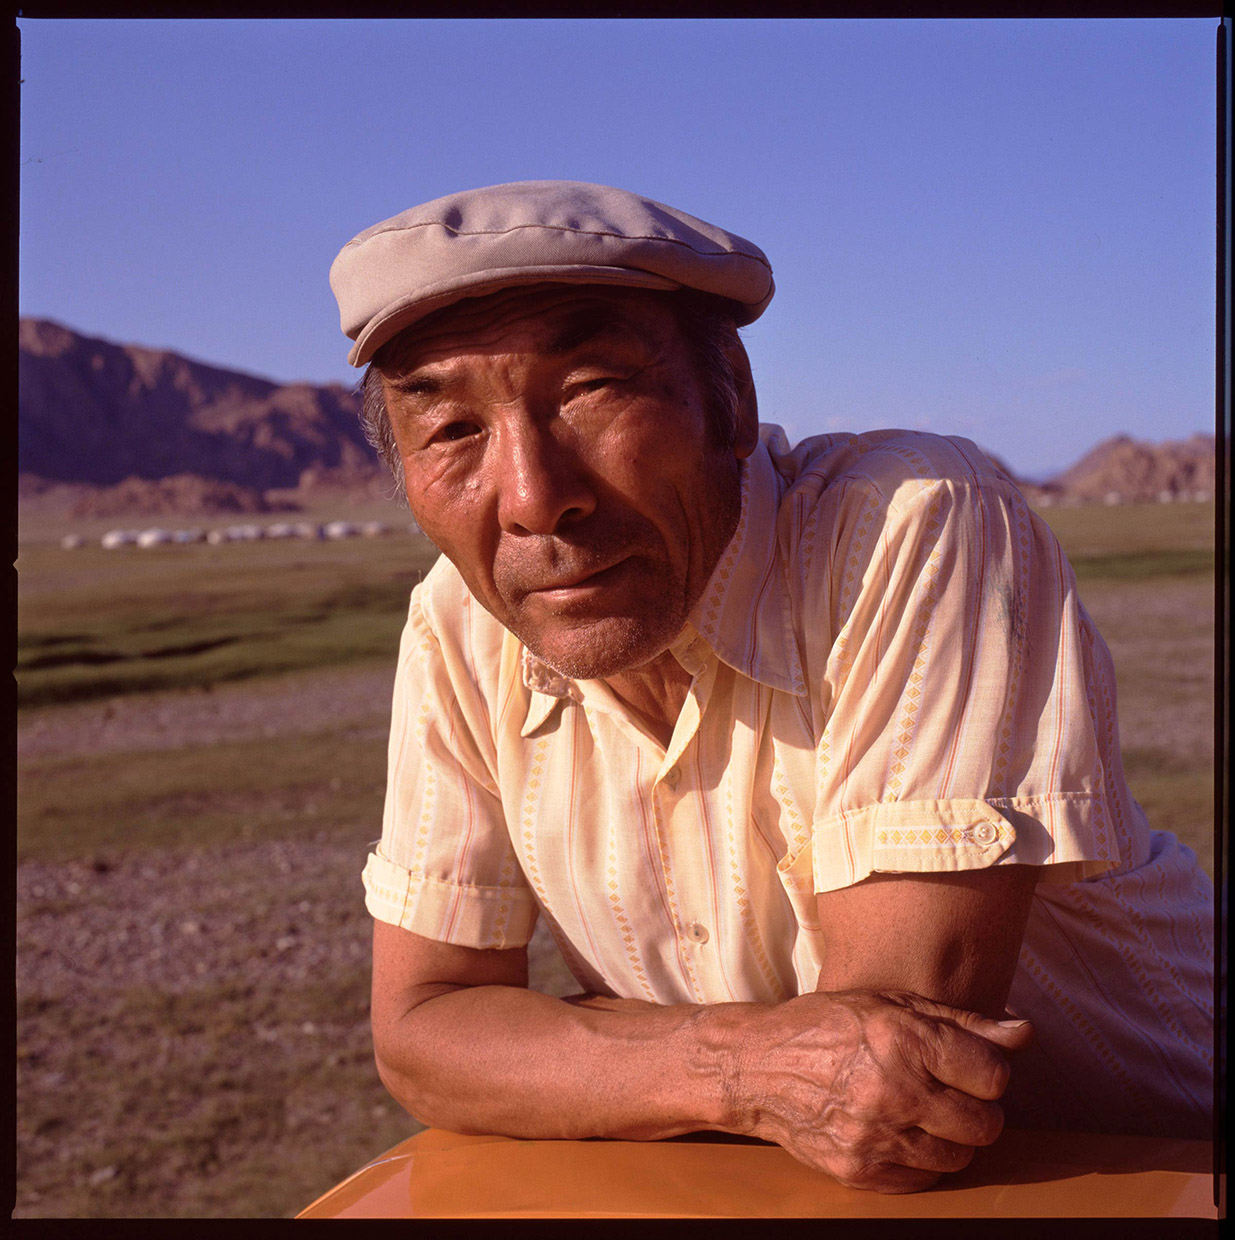 Mongolia_Hovd_Buyant-Valley_driver_LR